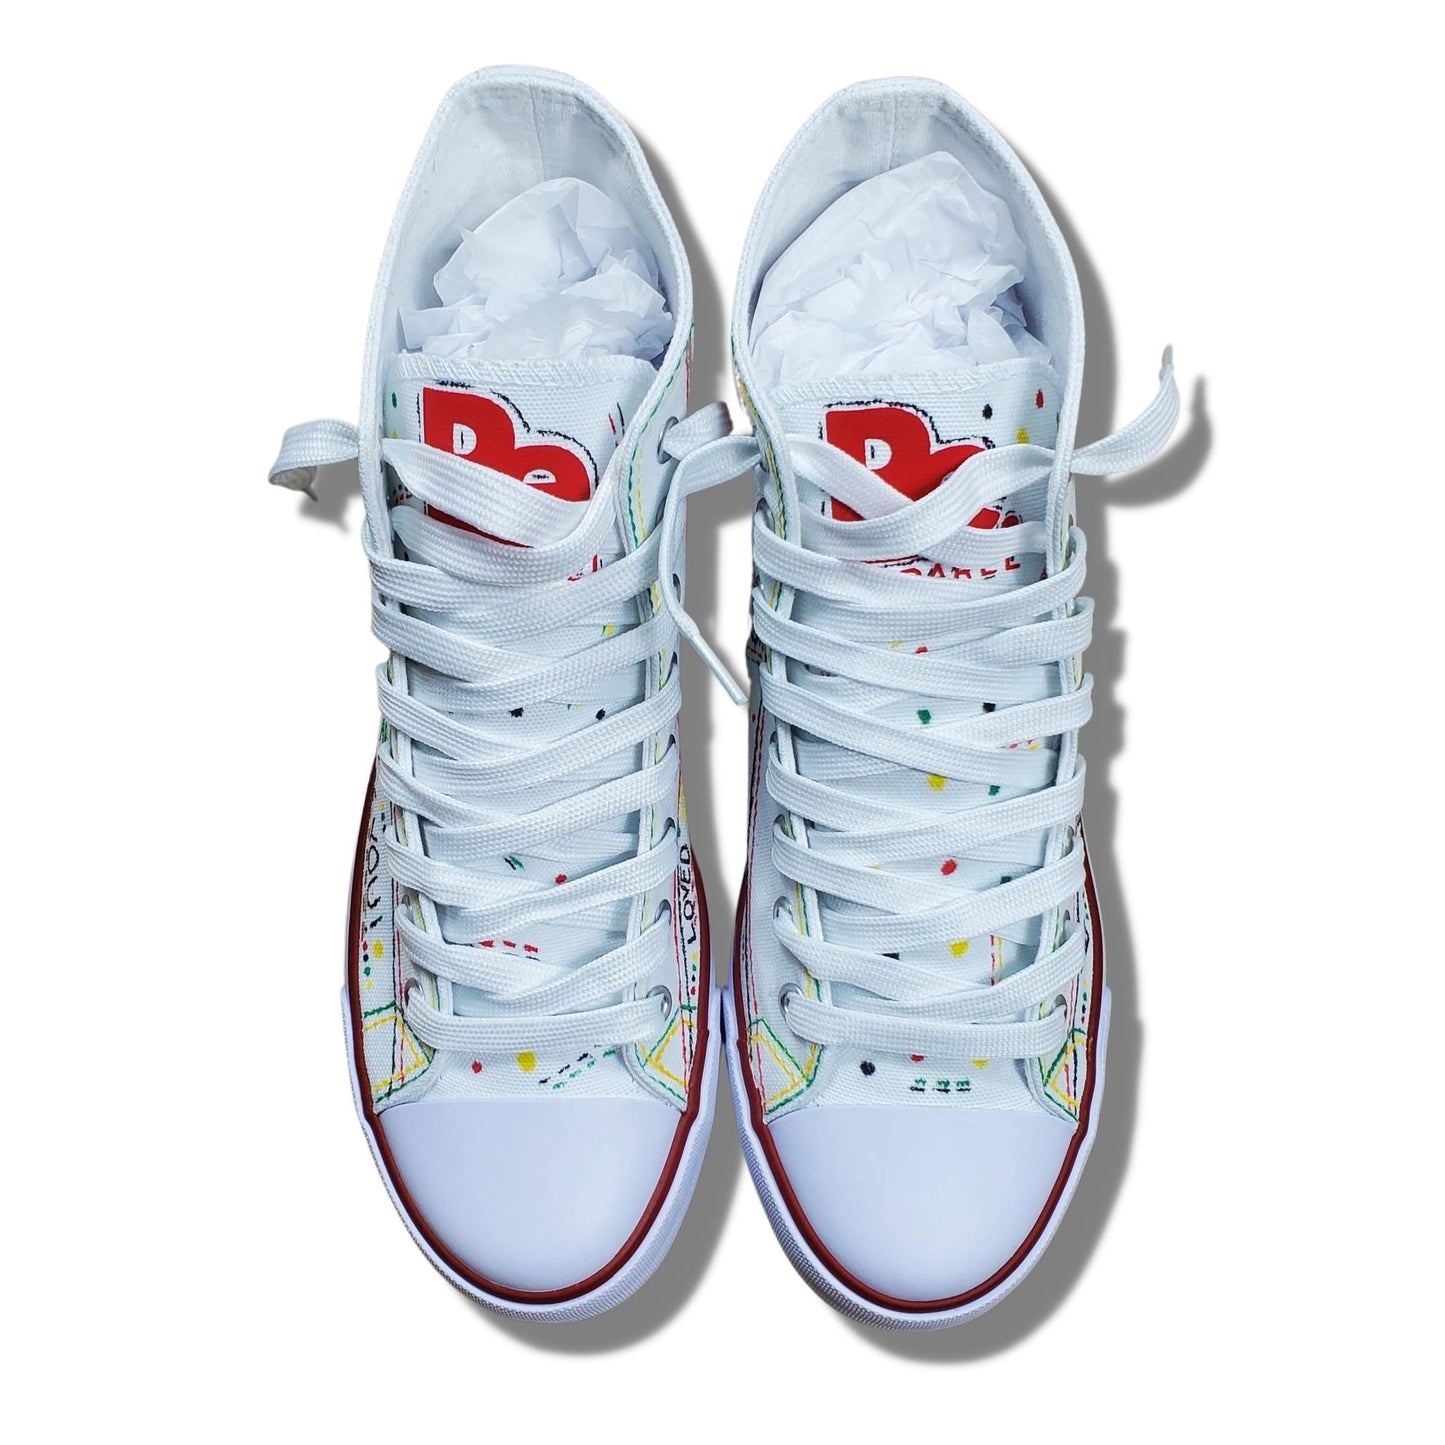 BE. CUSTOMIZED CANVAS SNEAKERS - Mens White Multicolored